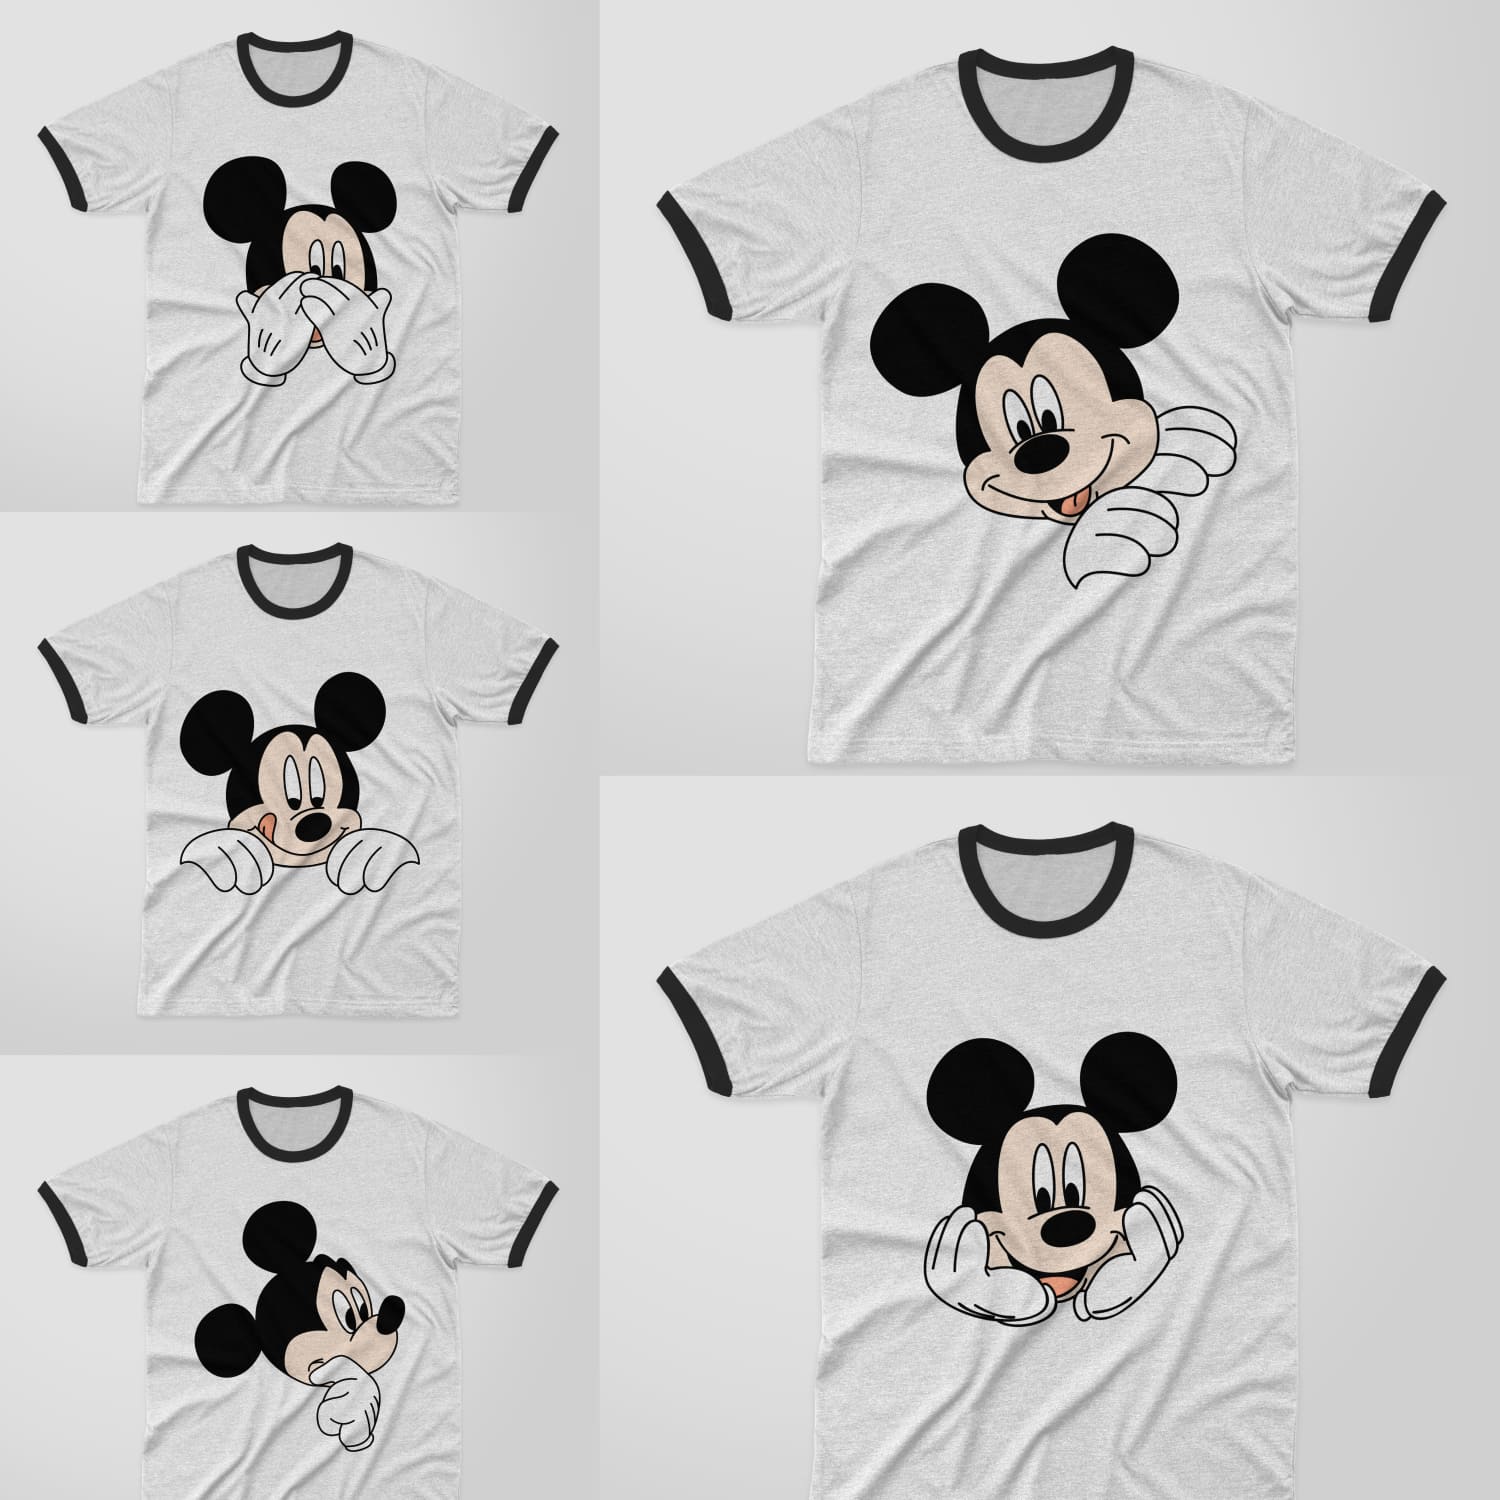 Mickey mouse svg created by DesignStudio.